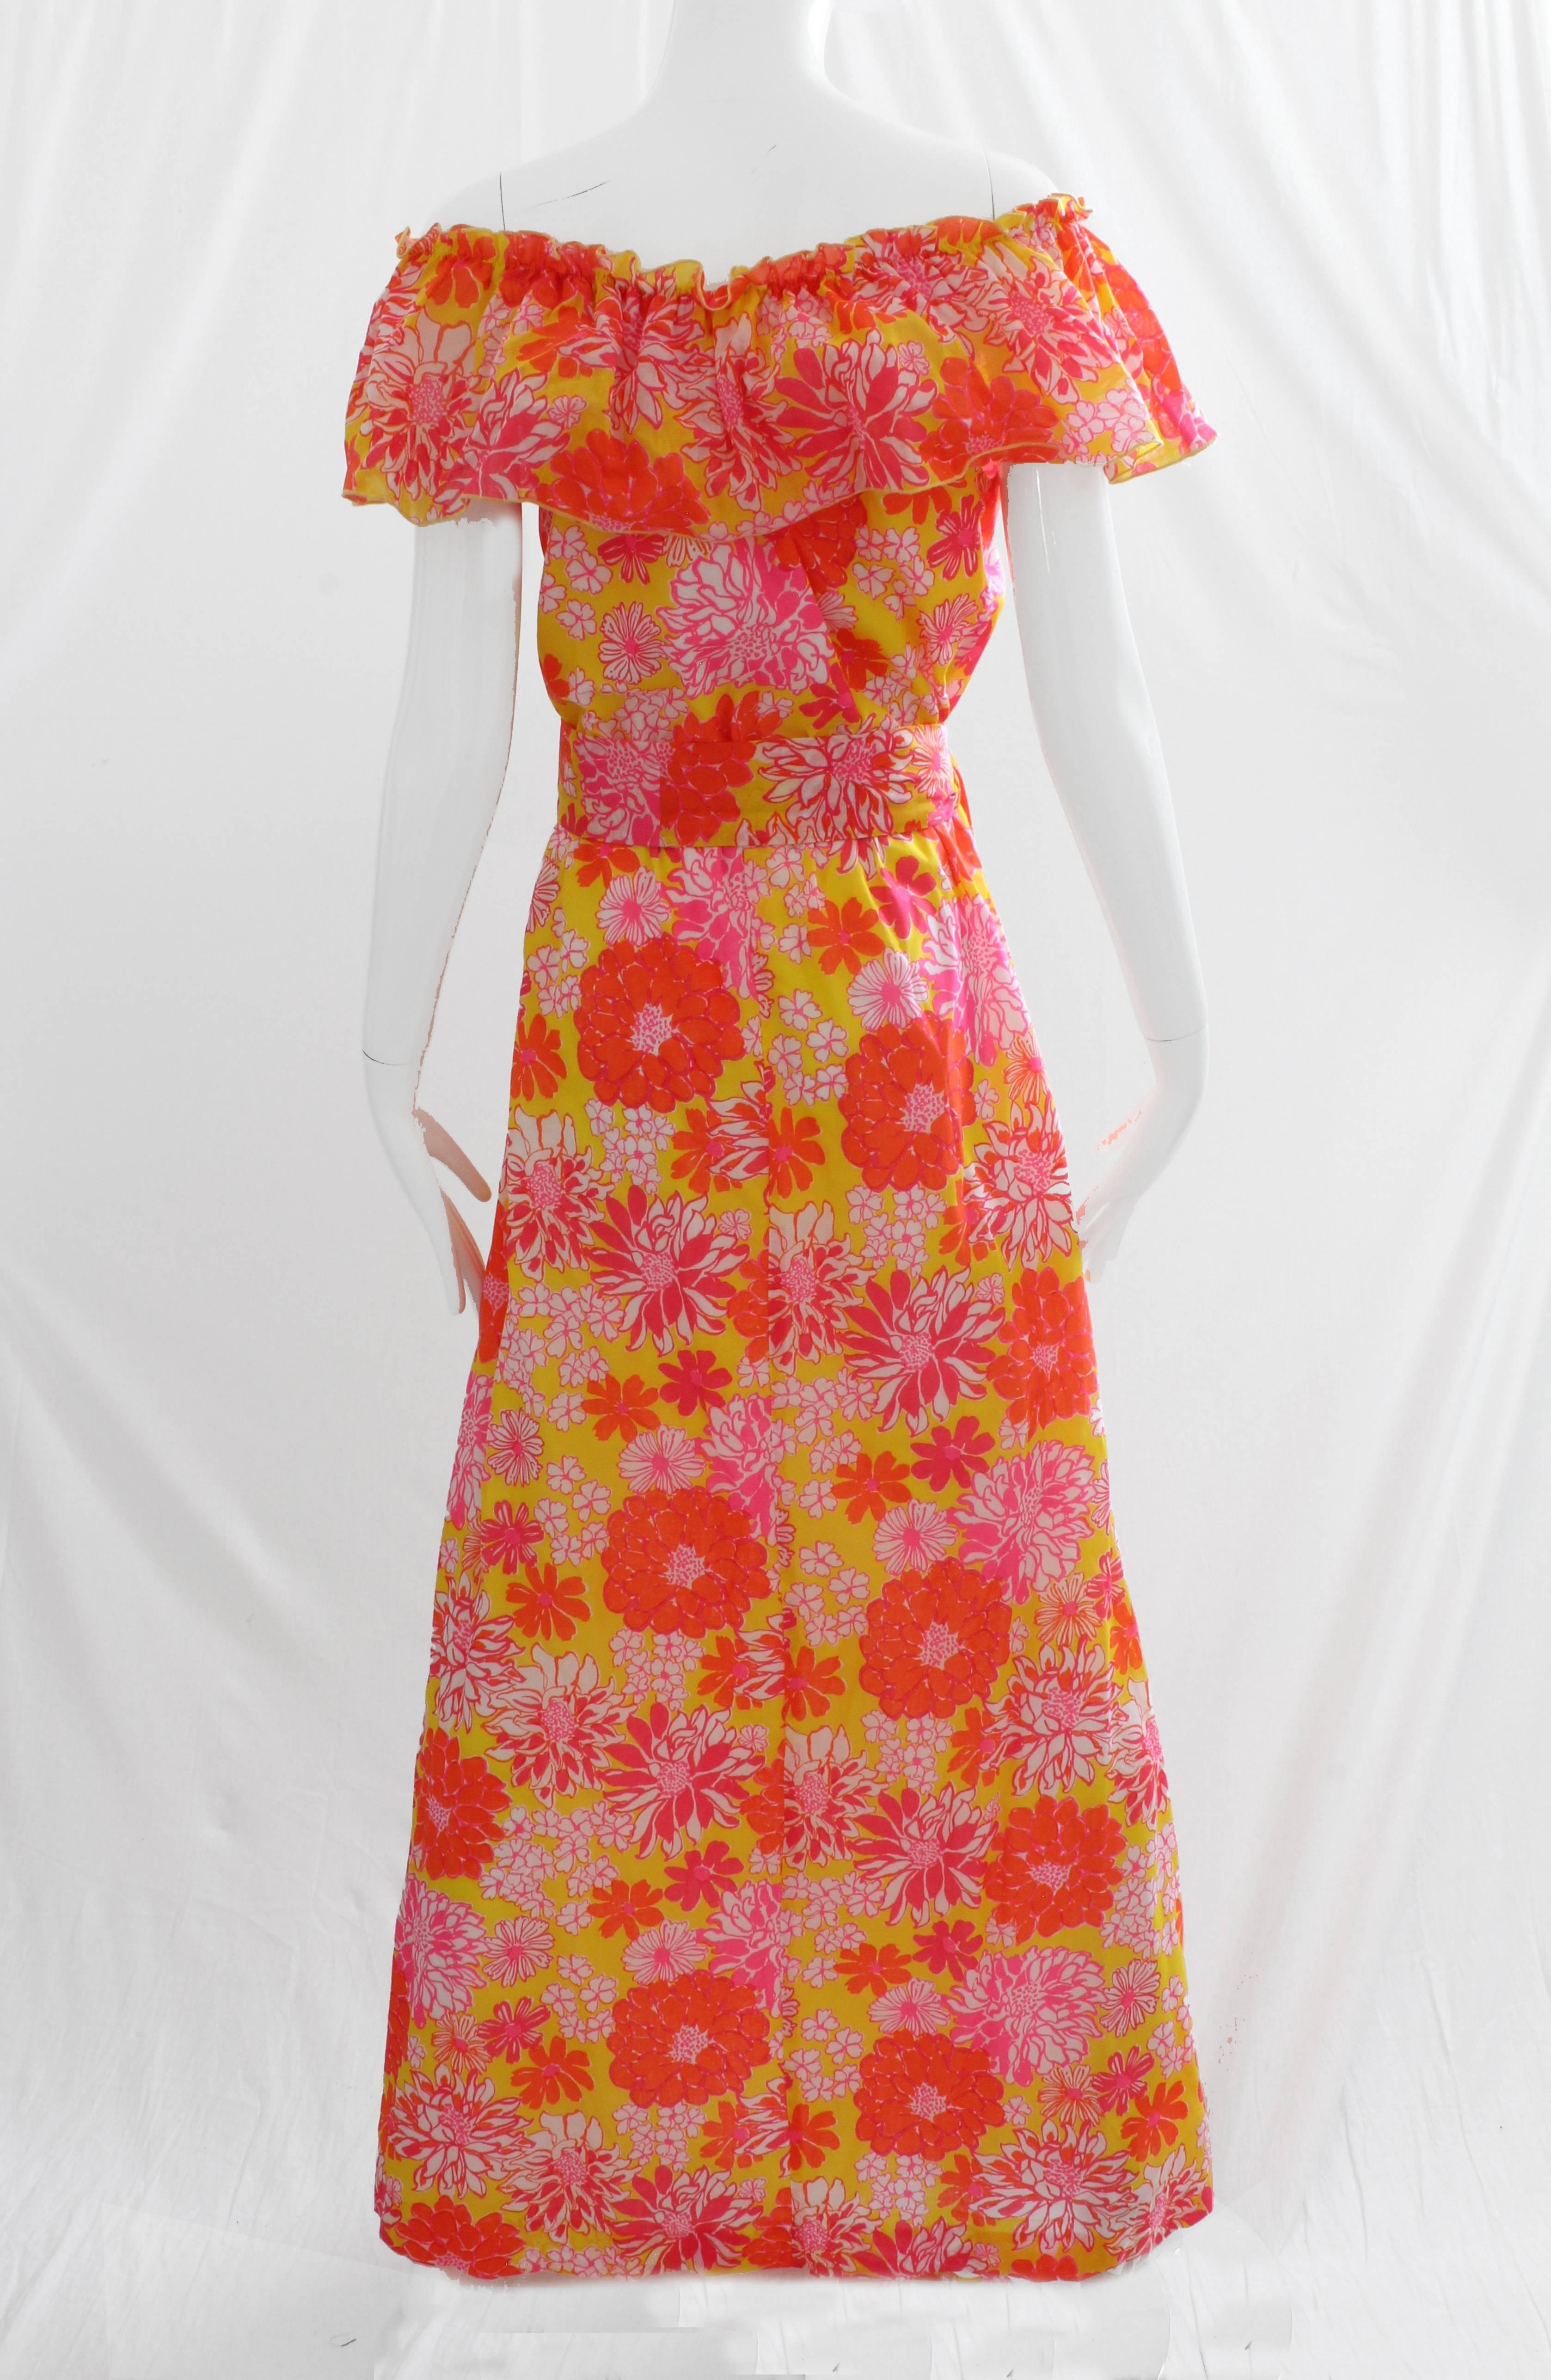 Orange Lilly Pulitzer Floral Maxi Dress with Off Shoulder Ruffle Trim and Sash, 1970s